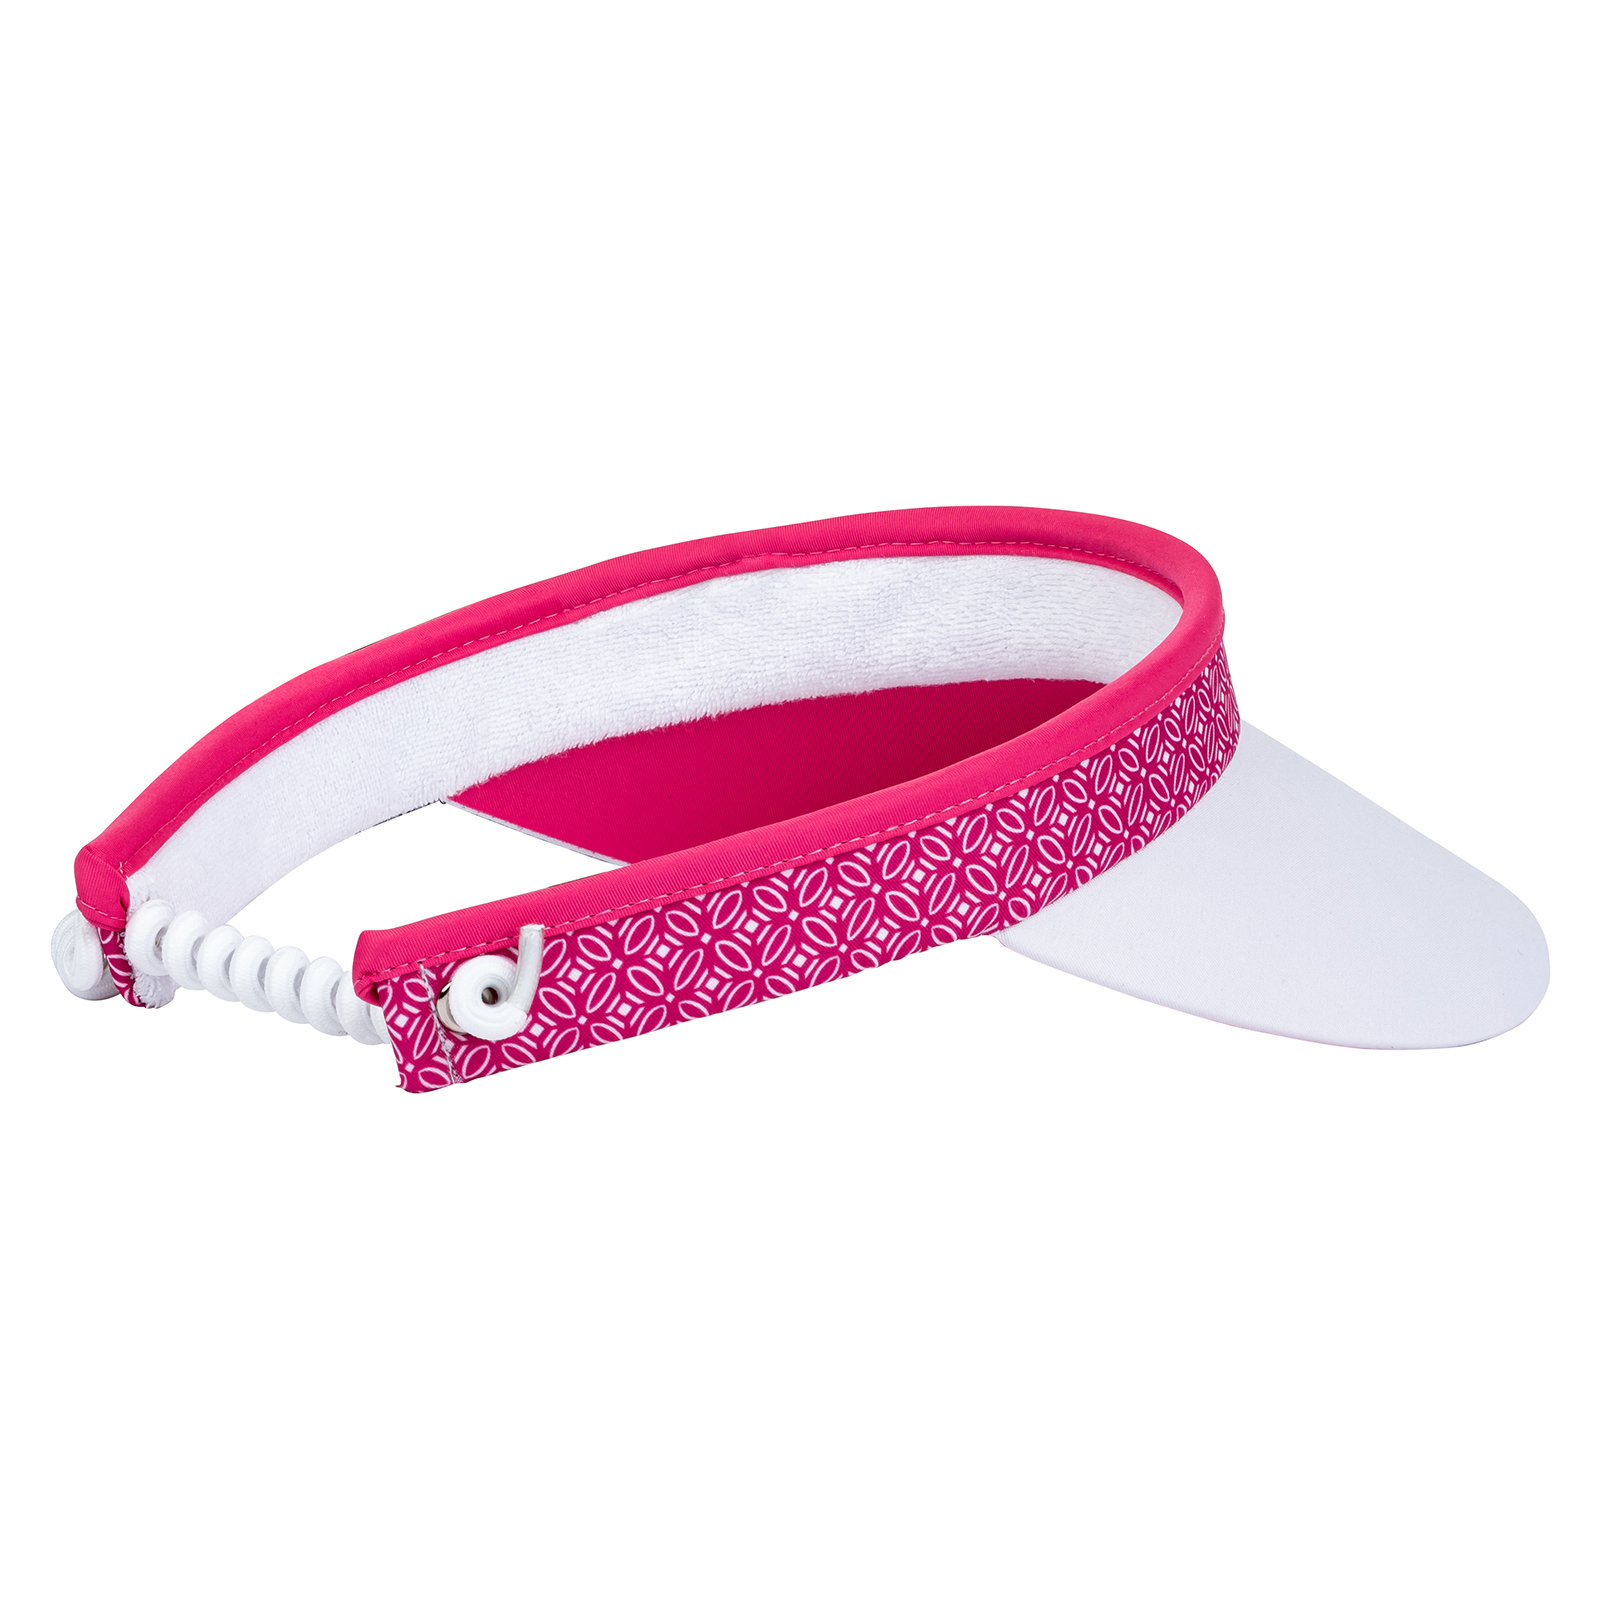 Ladies' golf visor with constrasting elements